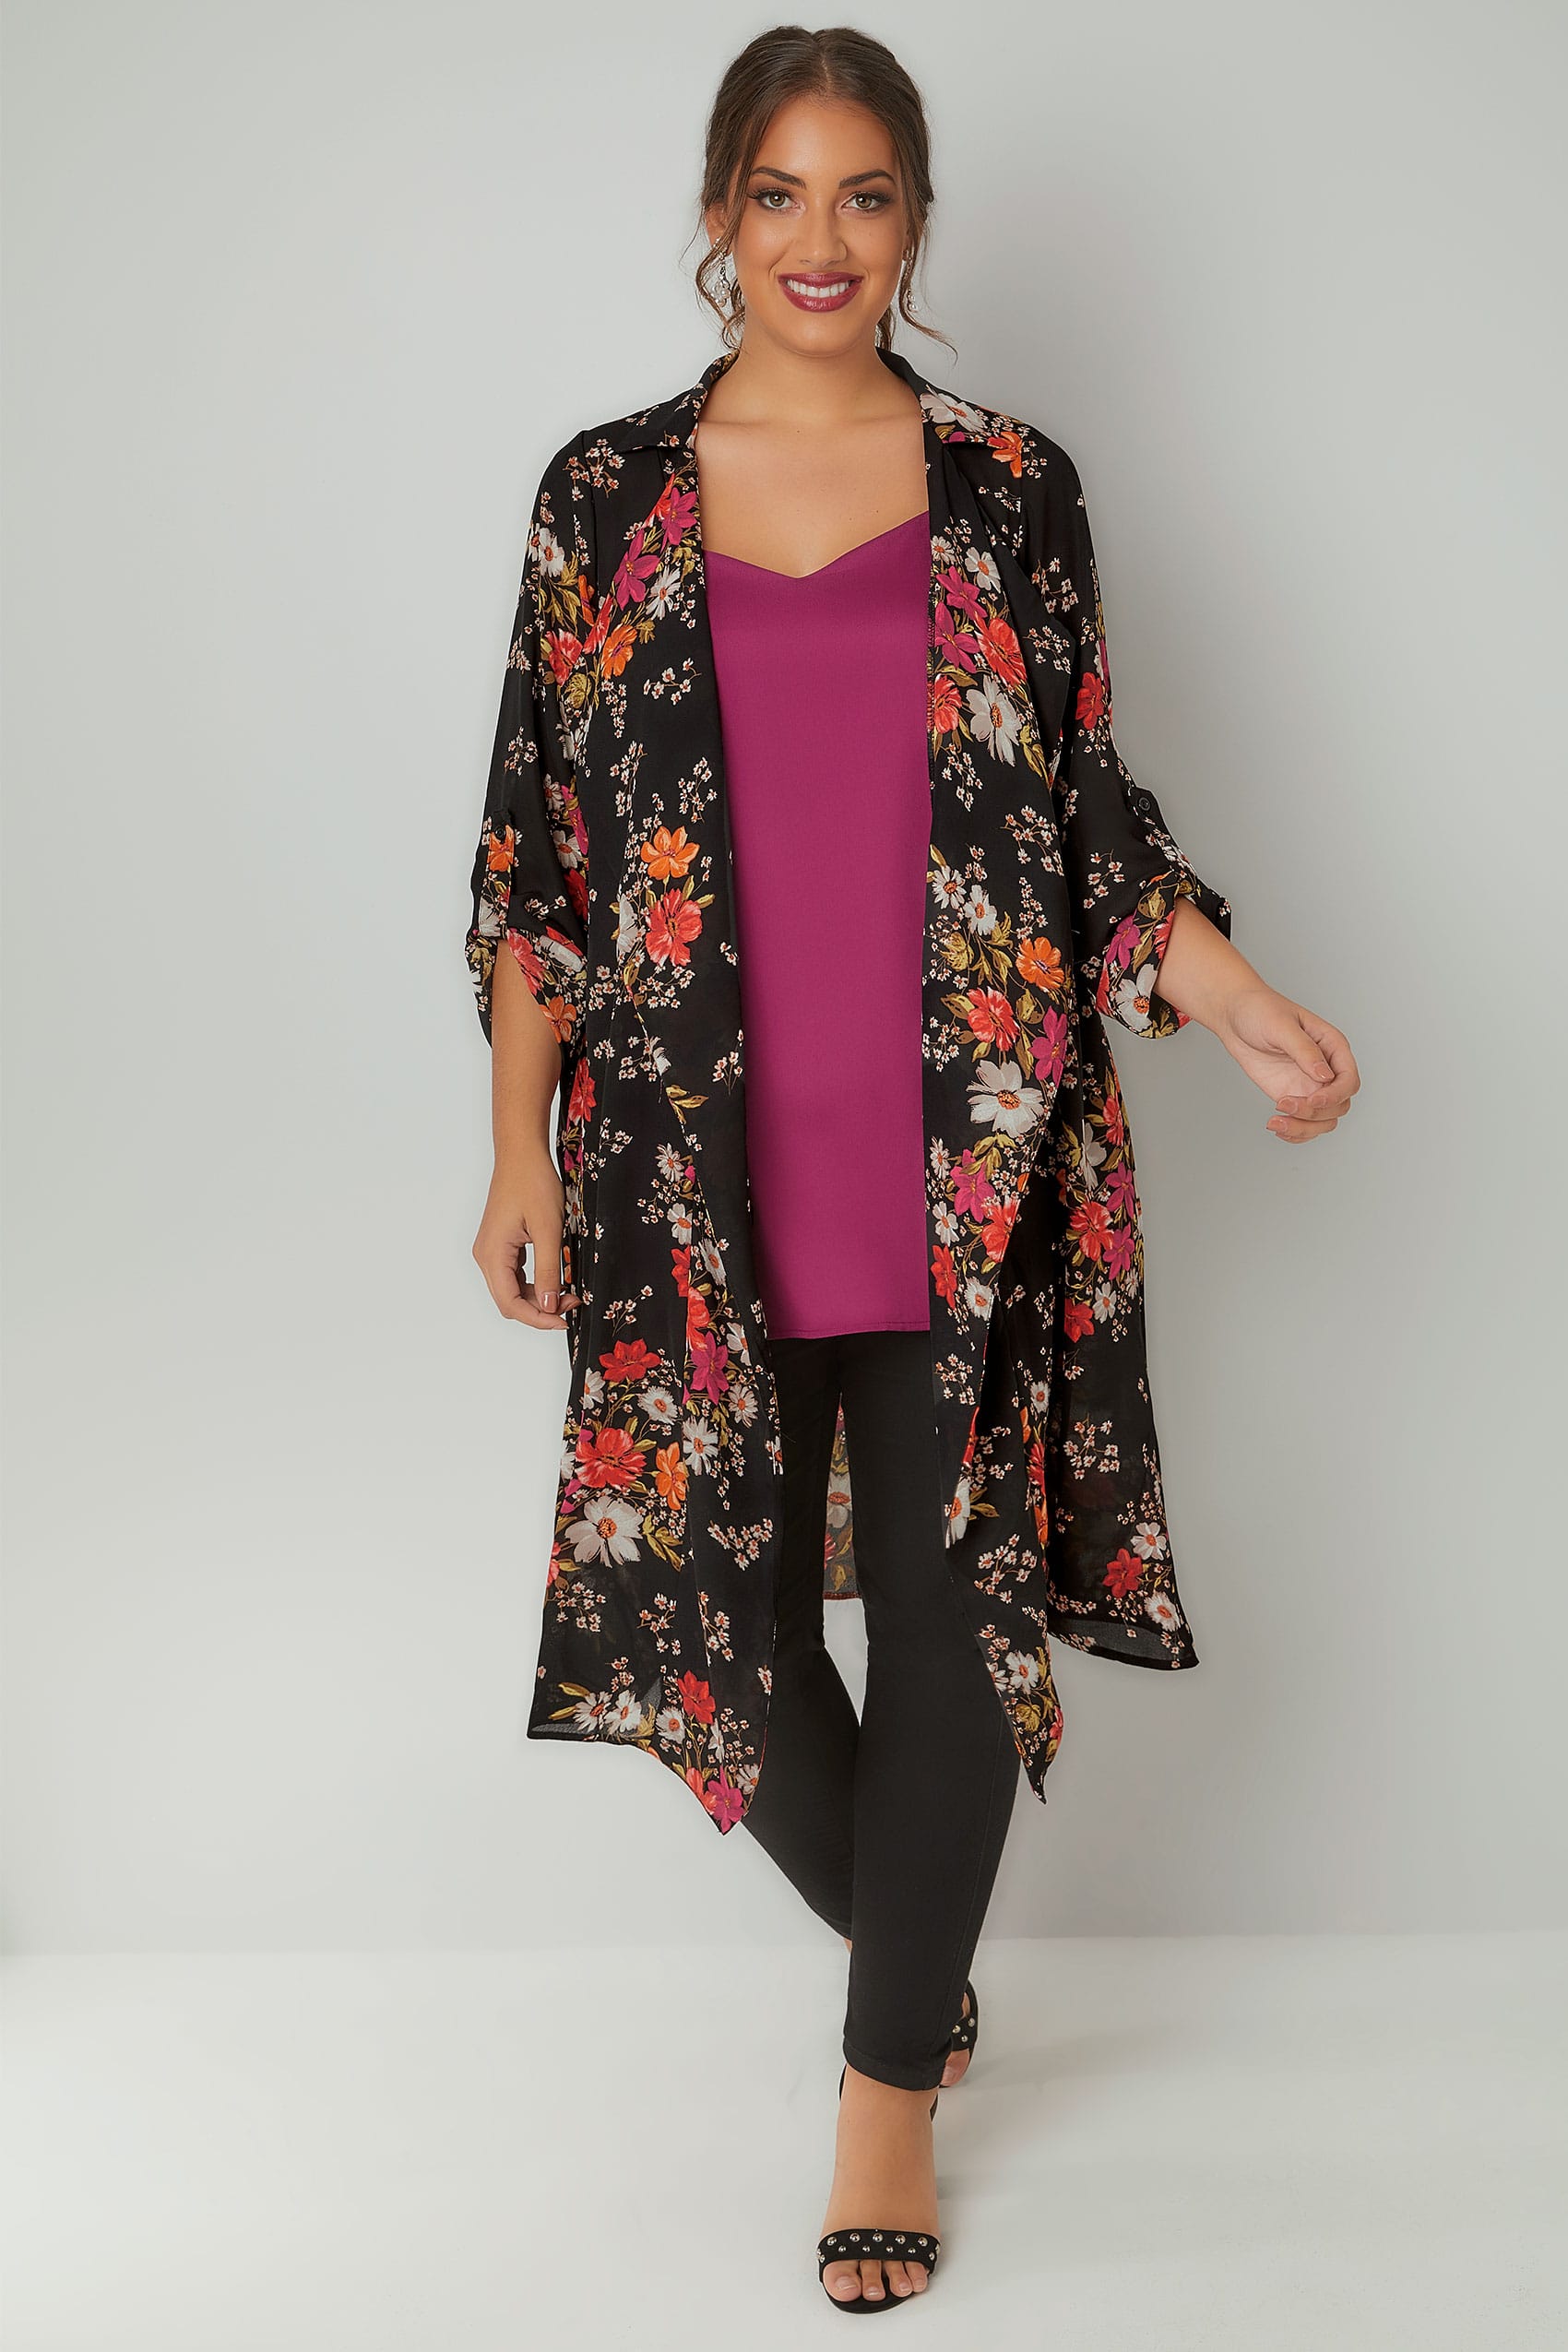 Black & Multi Floral Print Duster Jacket With Roll Up Sleeves, Plus ...